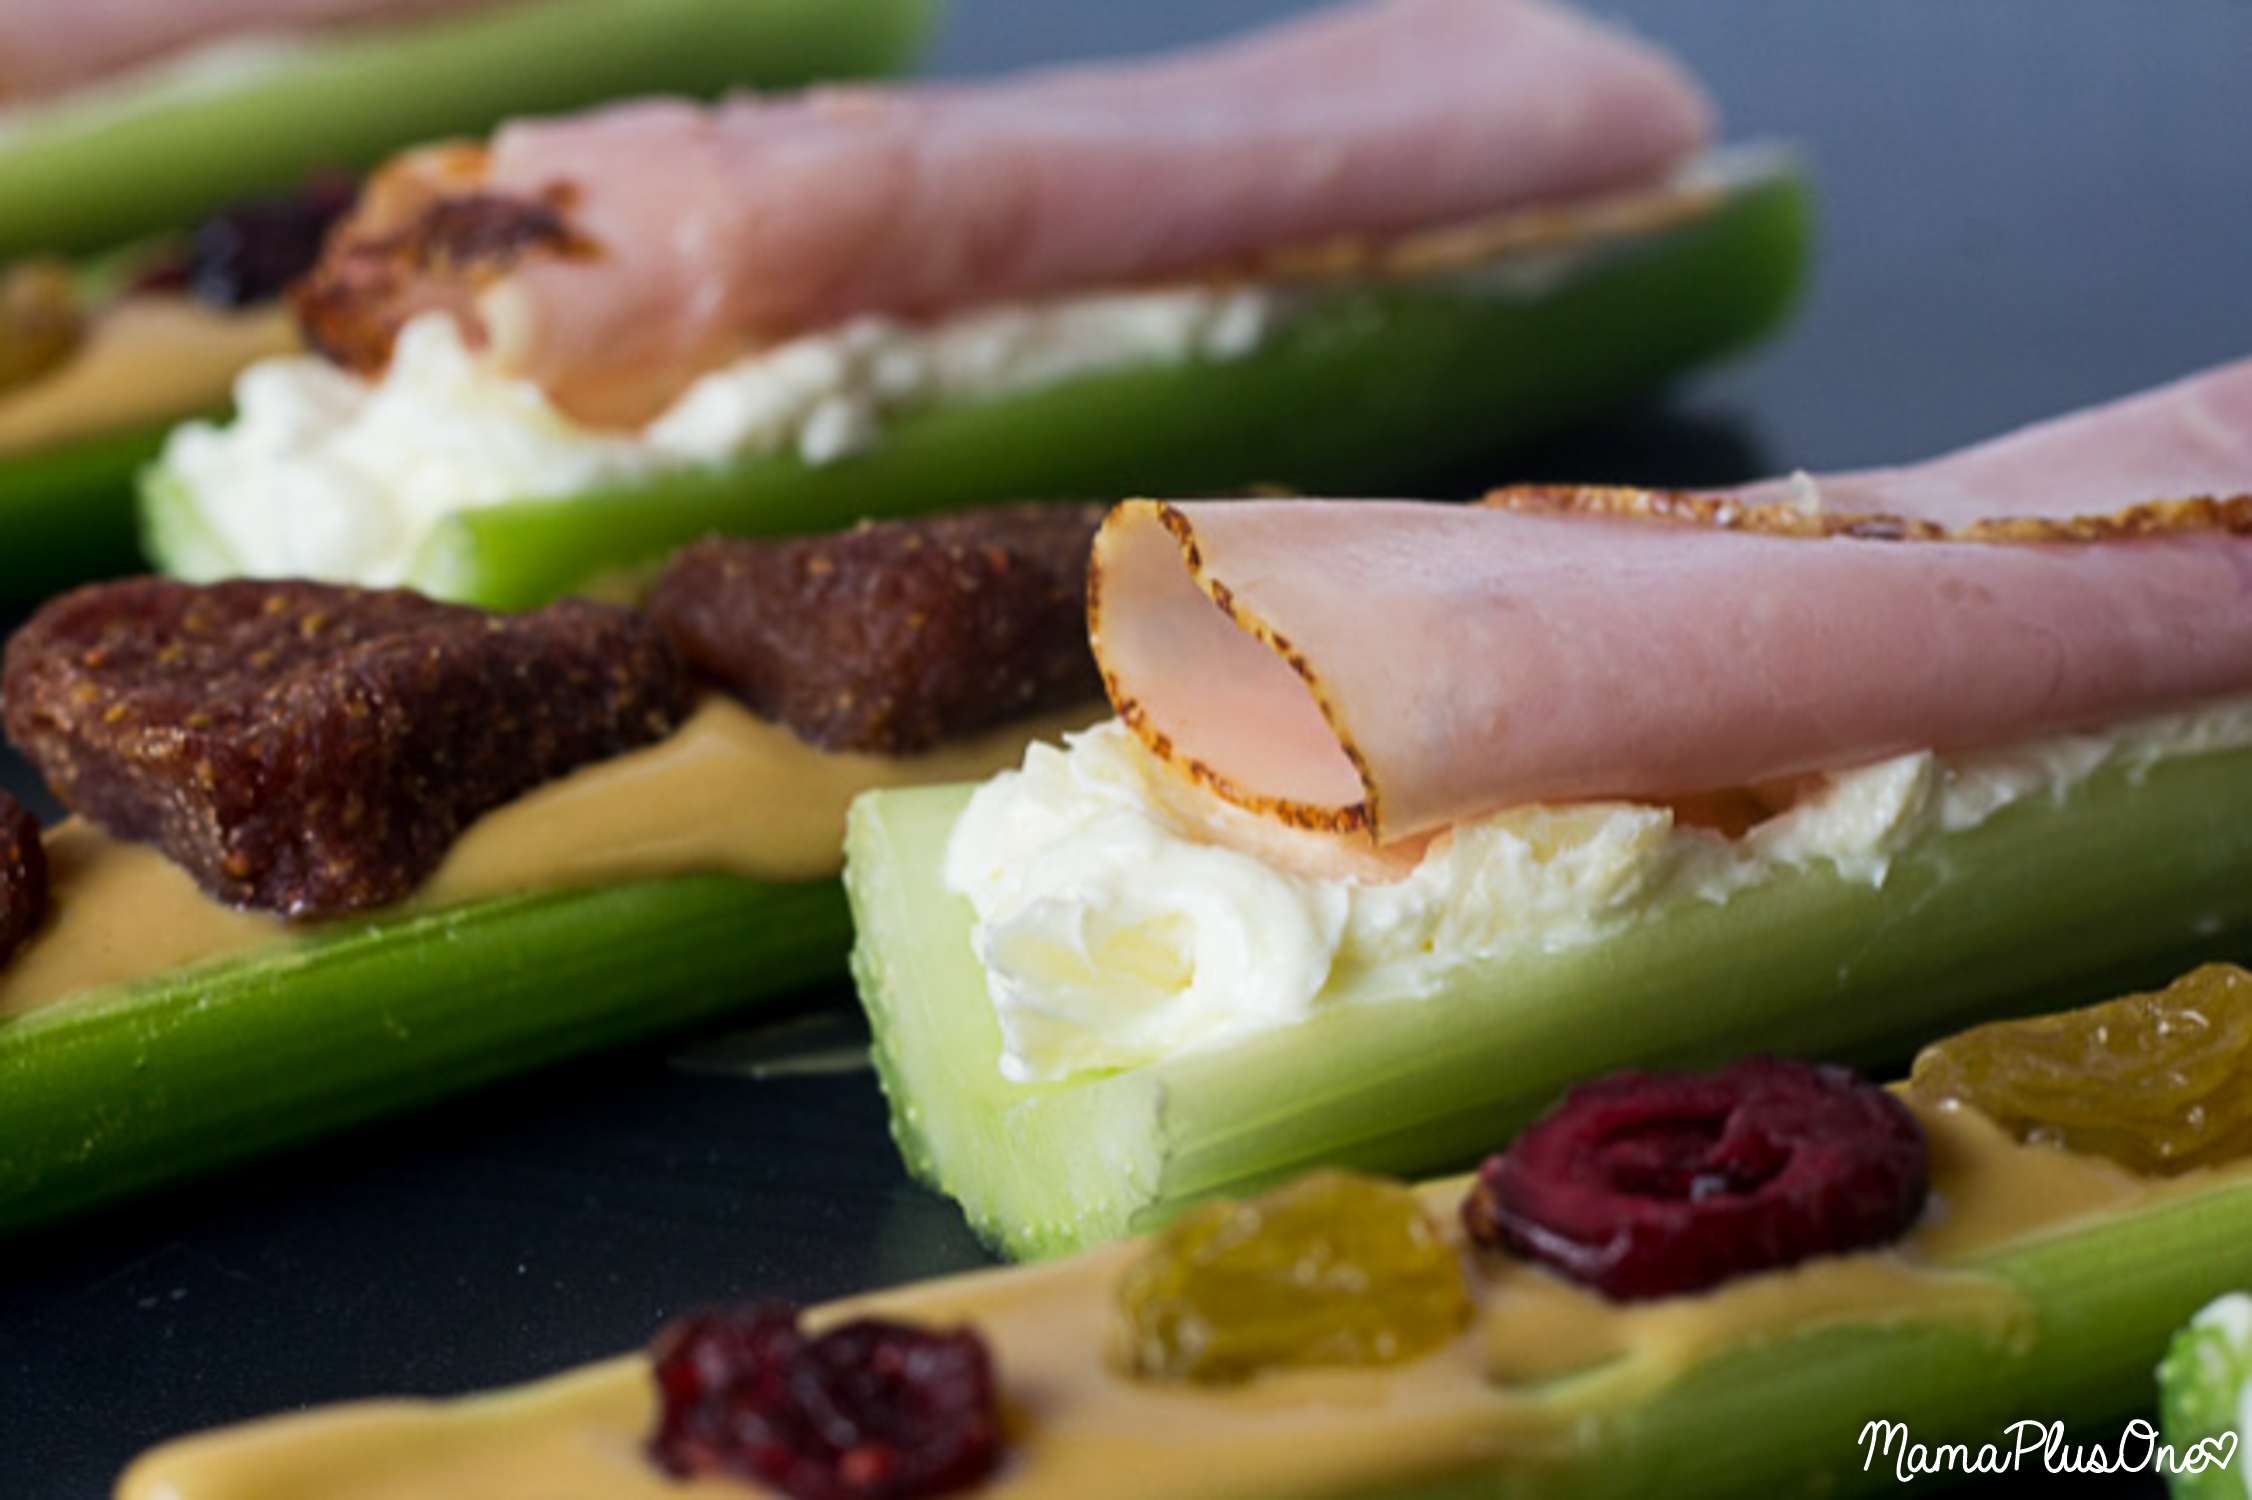 If you love easy after school snacks for your family, you'll love this after school snack recipe for Ham on a Log! You've heard of ants on a log, but this is a twist on the classic. Simply make a delicious cream cheese spread, spread it on celery, and top with Eckrich Deli Meat ham! #EckrichFlavor #AskForEckrich